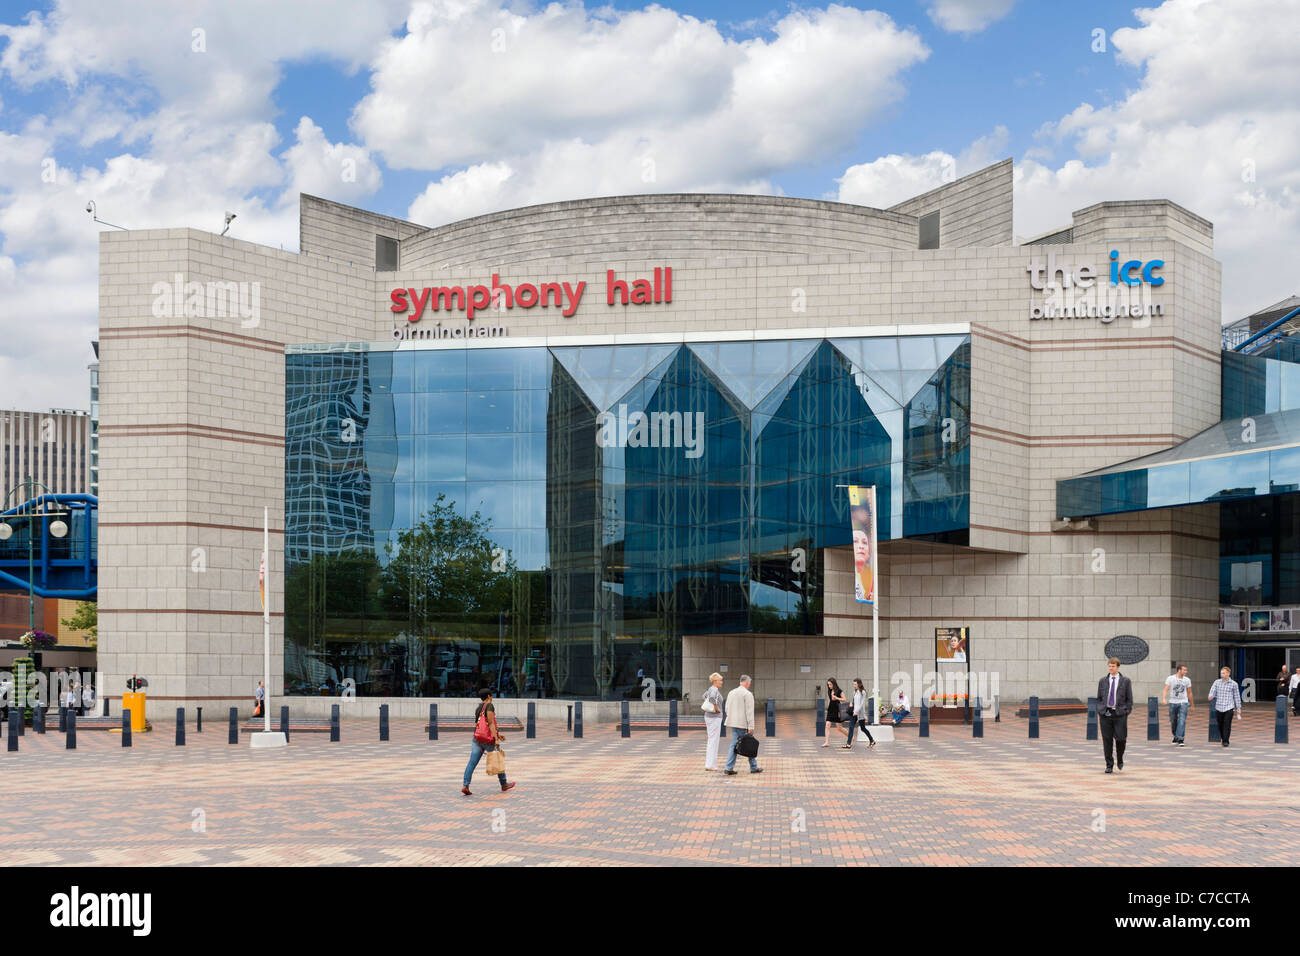 Entrance to the Symphony Hall from the Broad Street side, Birmingham, West Midlands, England, UK Stock Photo